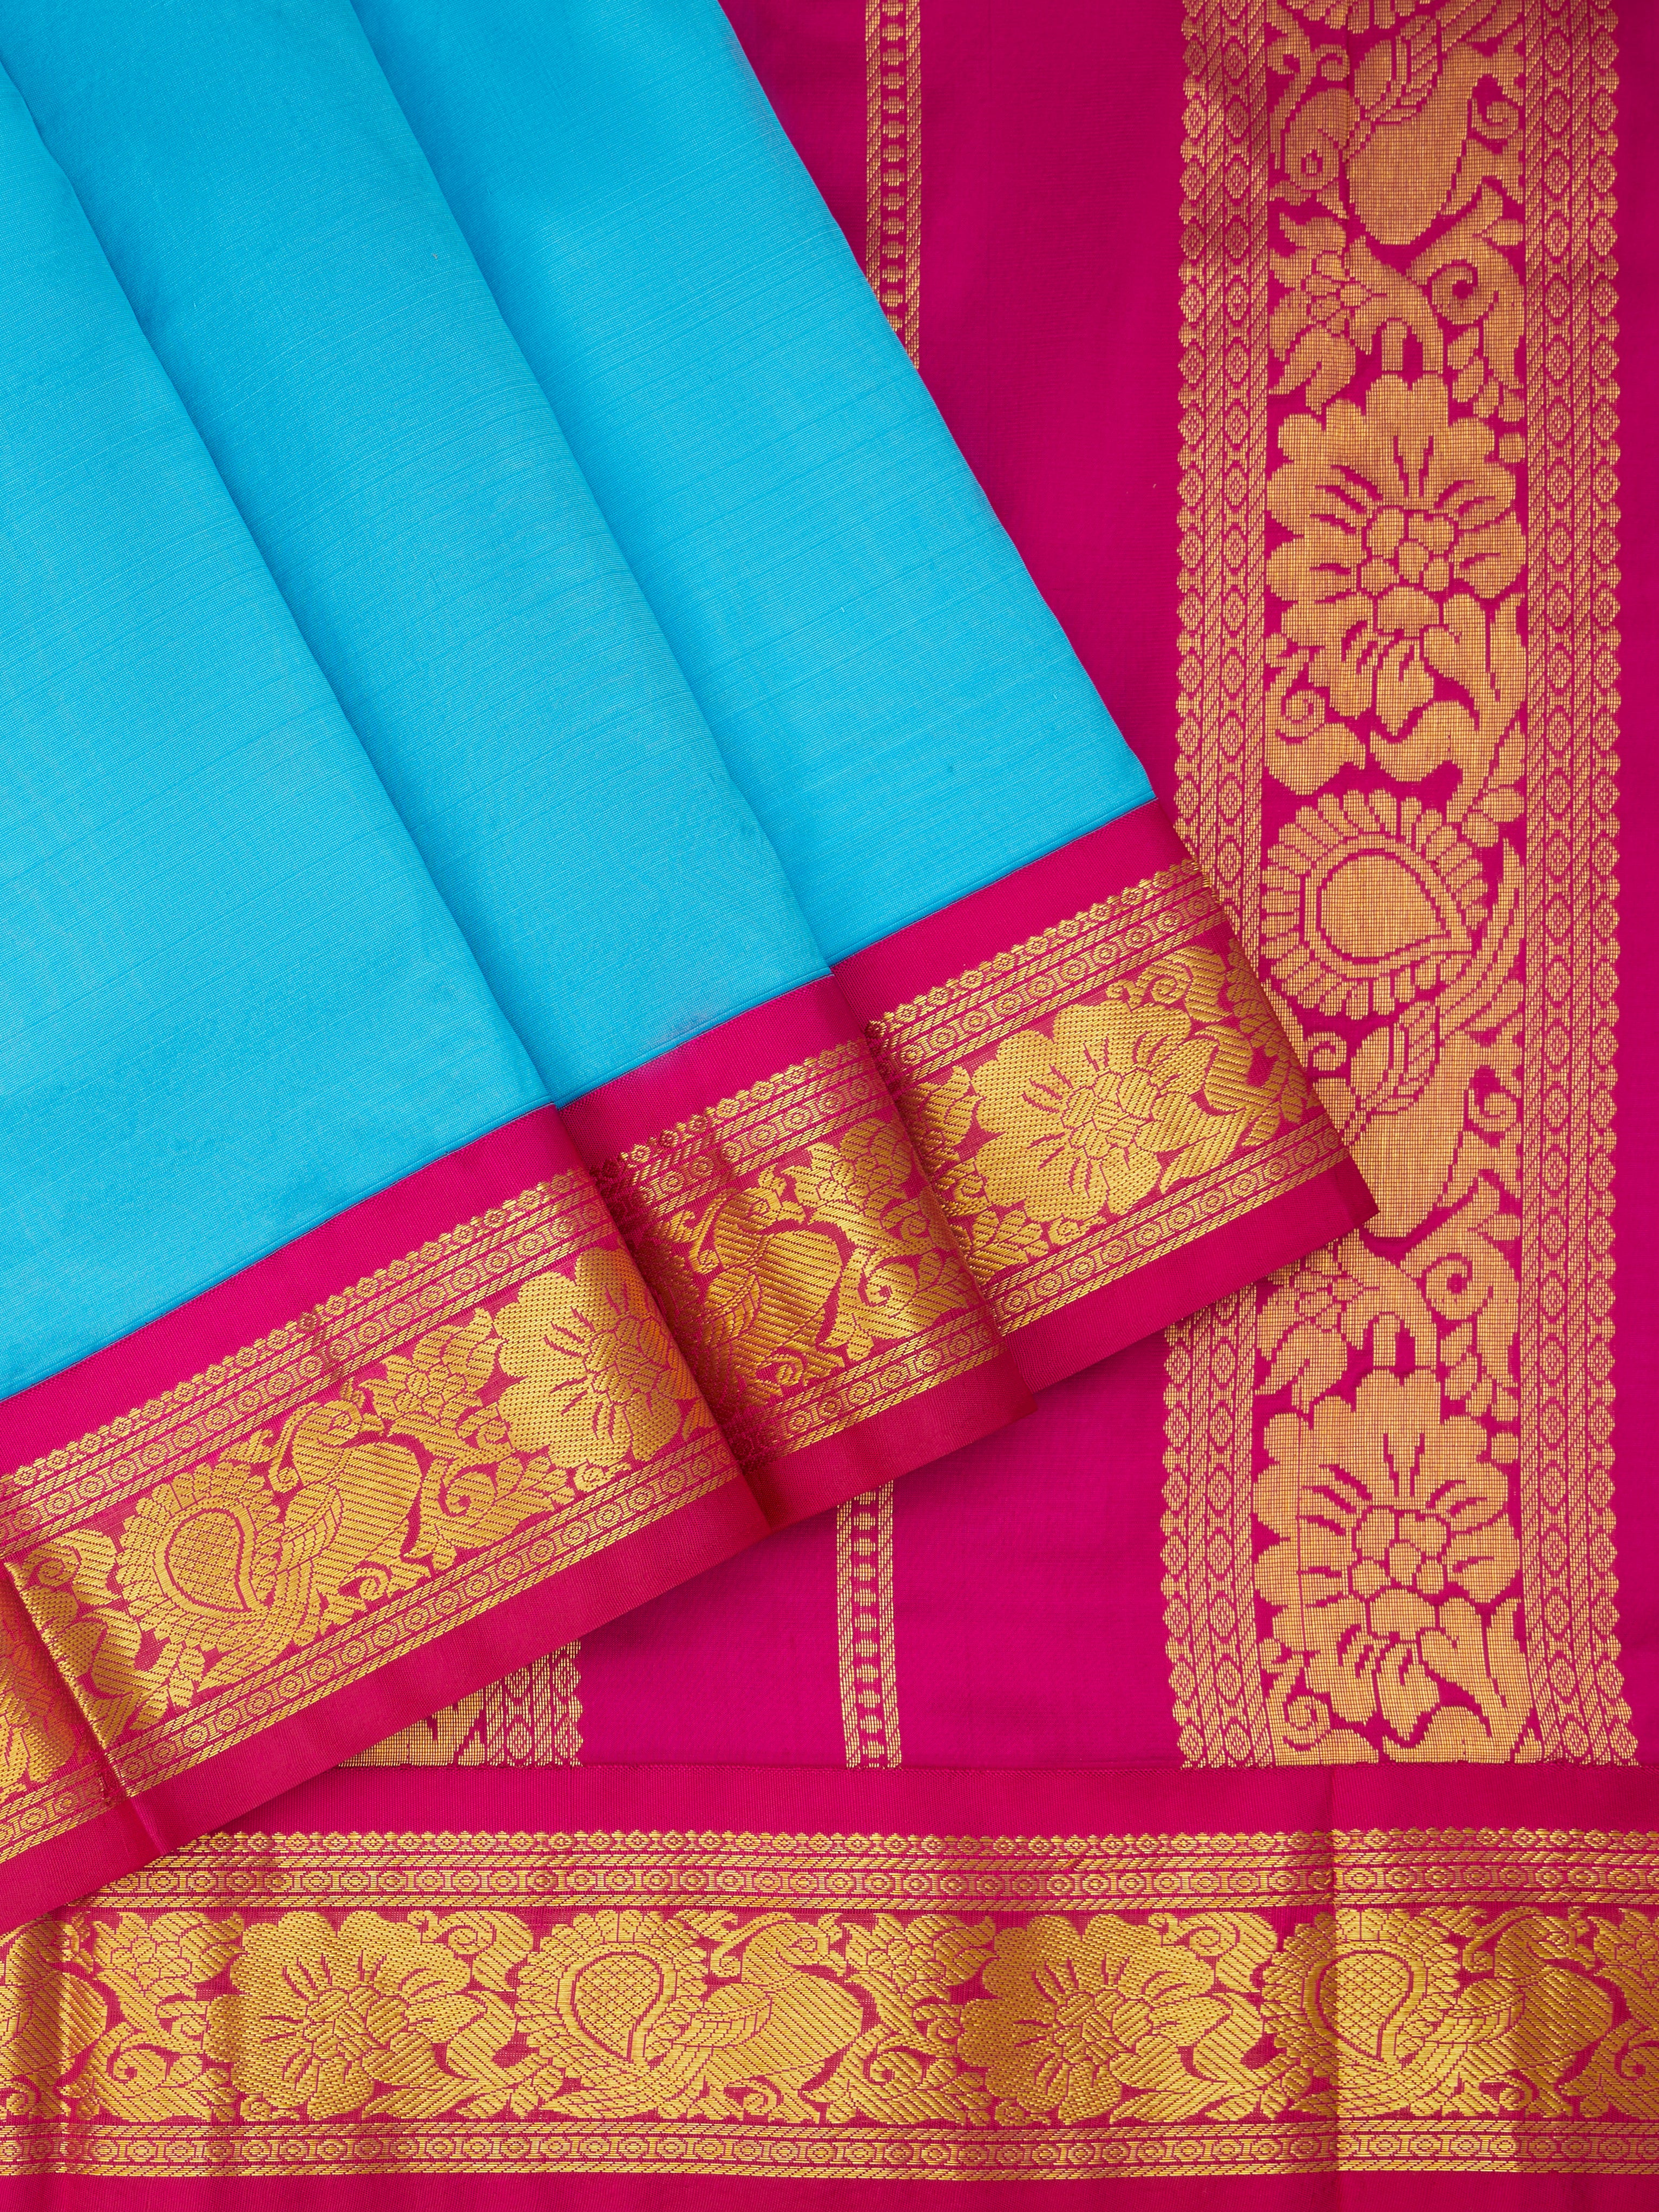 Madisar & Panchagacham - Silk Sarees Nine Yards' designs are known for  their intricate patterns and broader, thicker borders. These sarees are  crafted with utmost care and attention to detail, using the